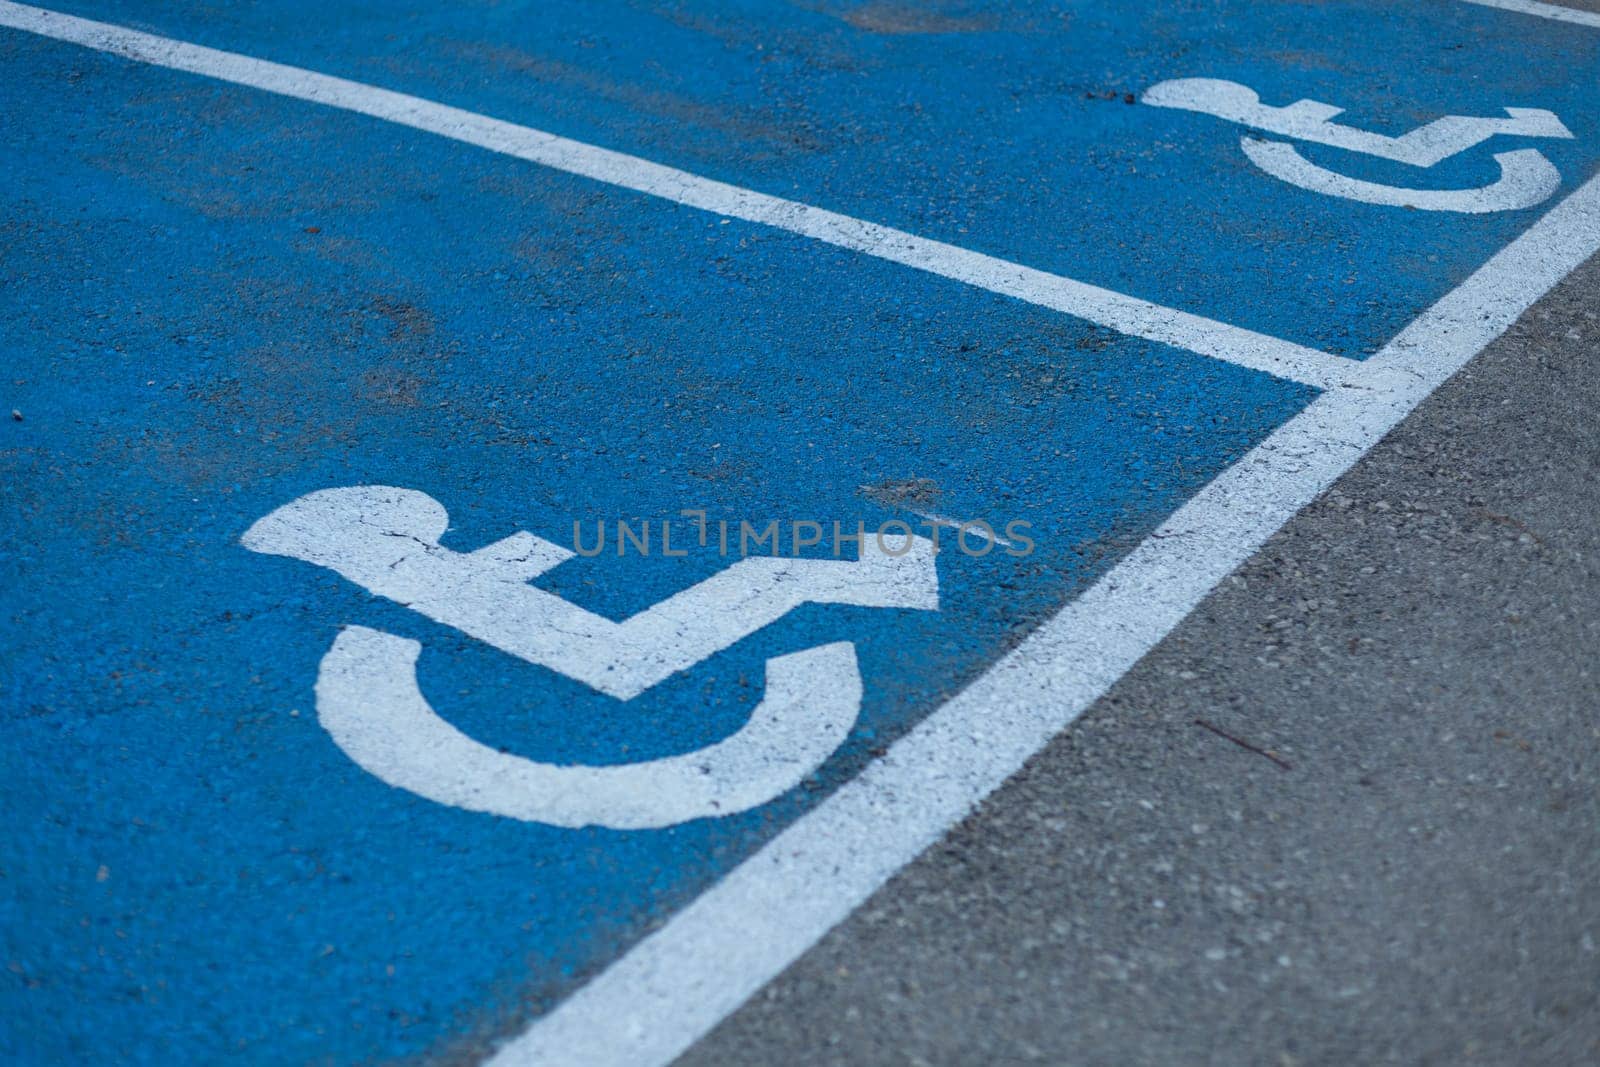 Markings on the road Place for people with disabilities. High quality photo